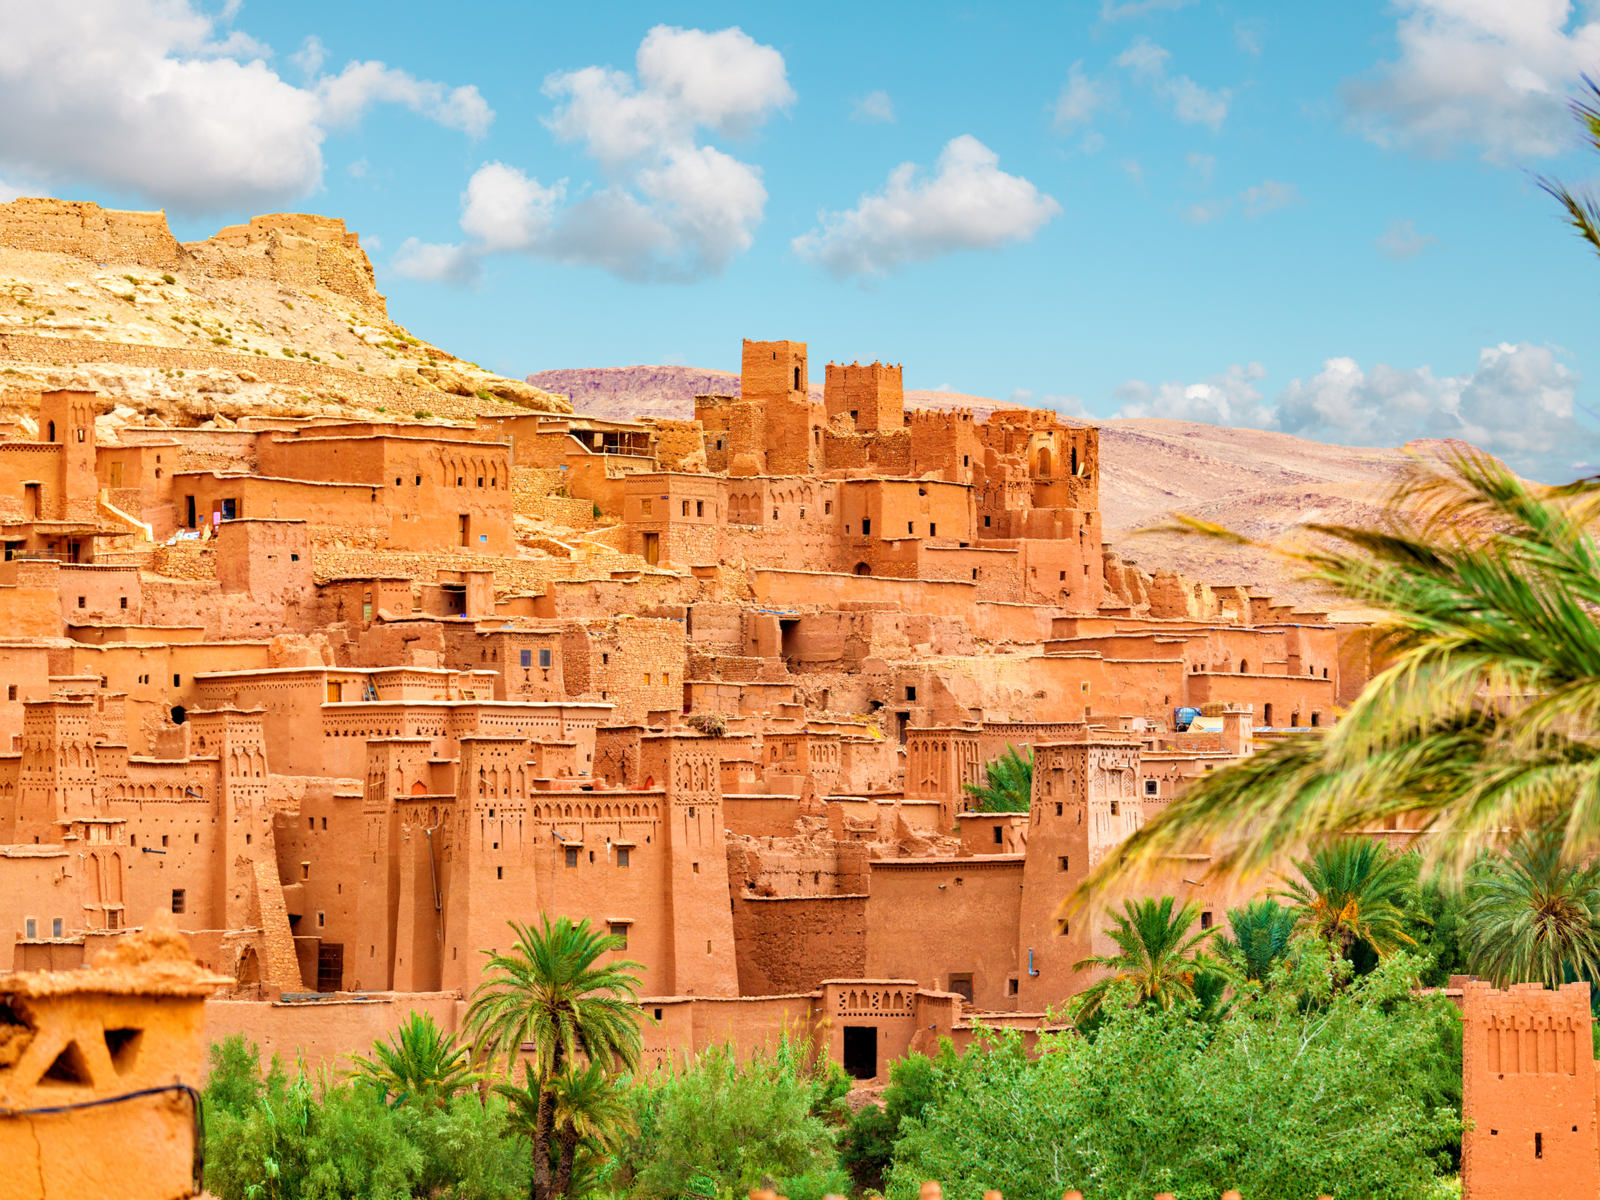 Clay-like structures at a desert in Ait Ben Haddou, Morocco is one of UNESCO World Heritage Site since 1987 and a Game of Thrones filming locations you can visit